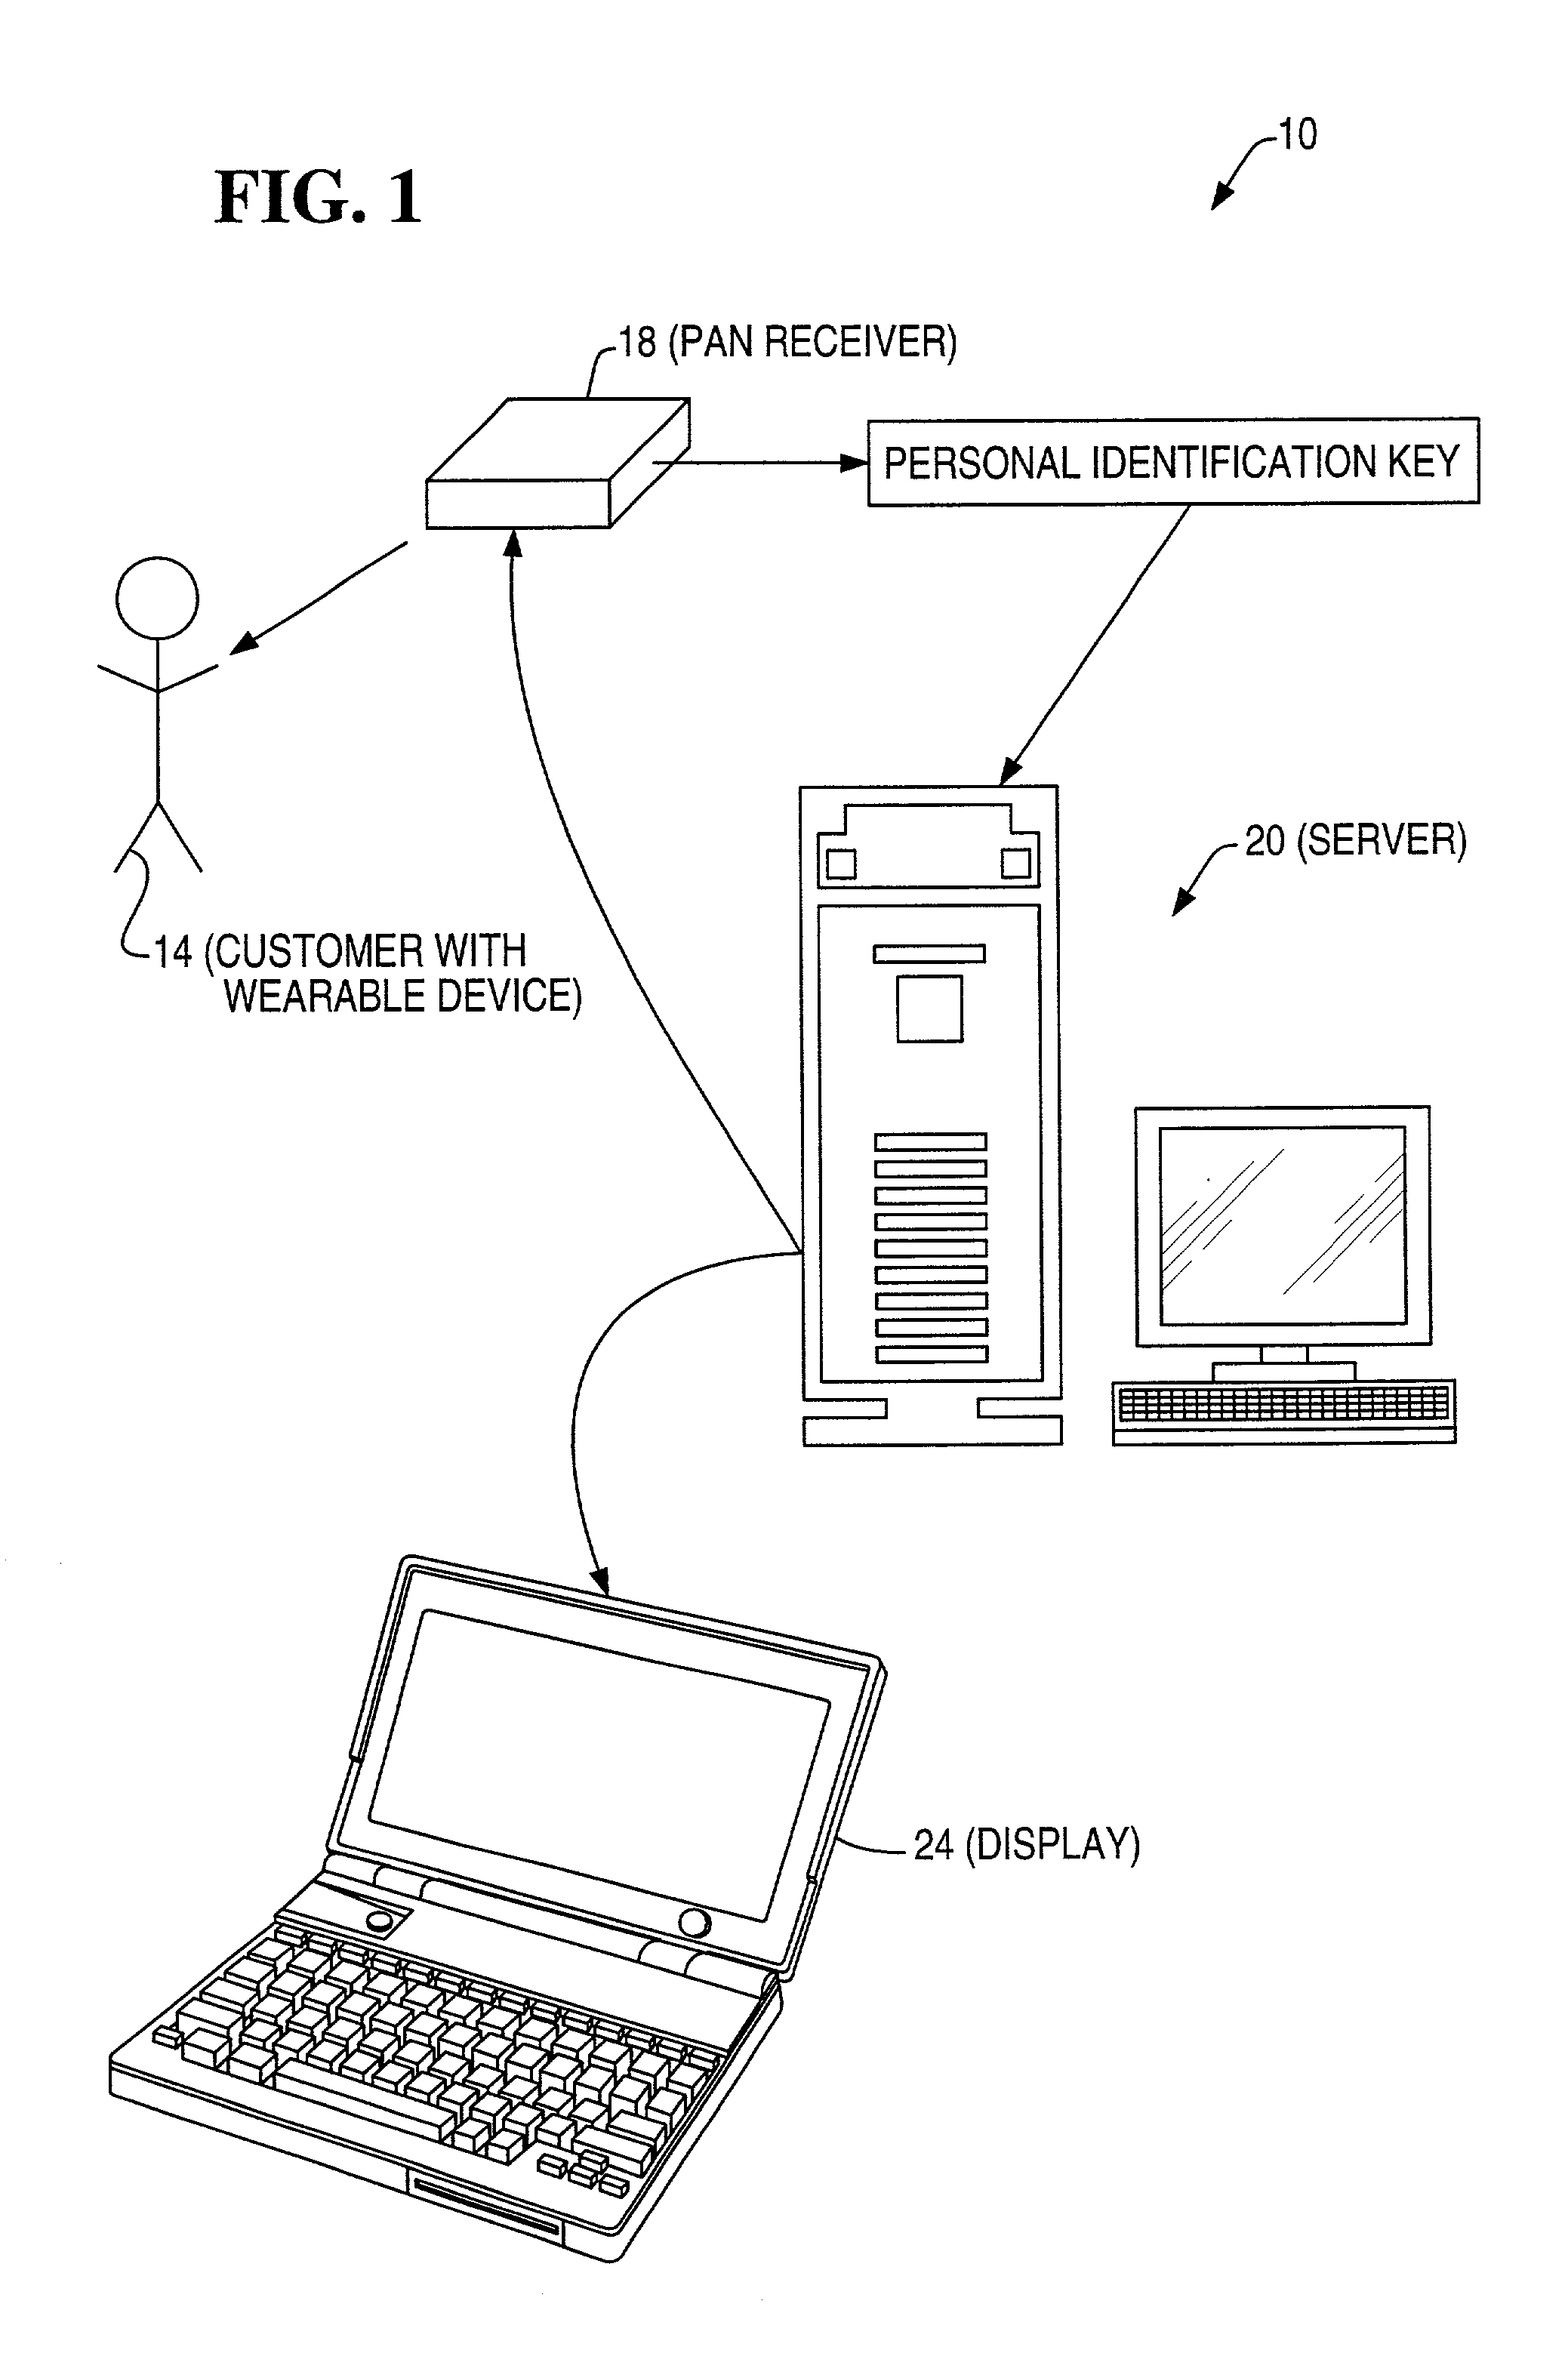 System and method for coupling users to a retail computer system with low risk of eavesdropping